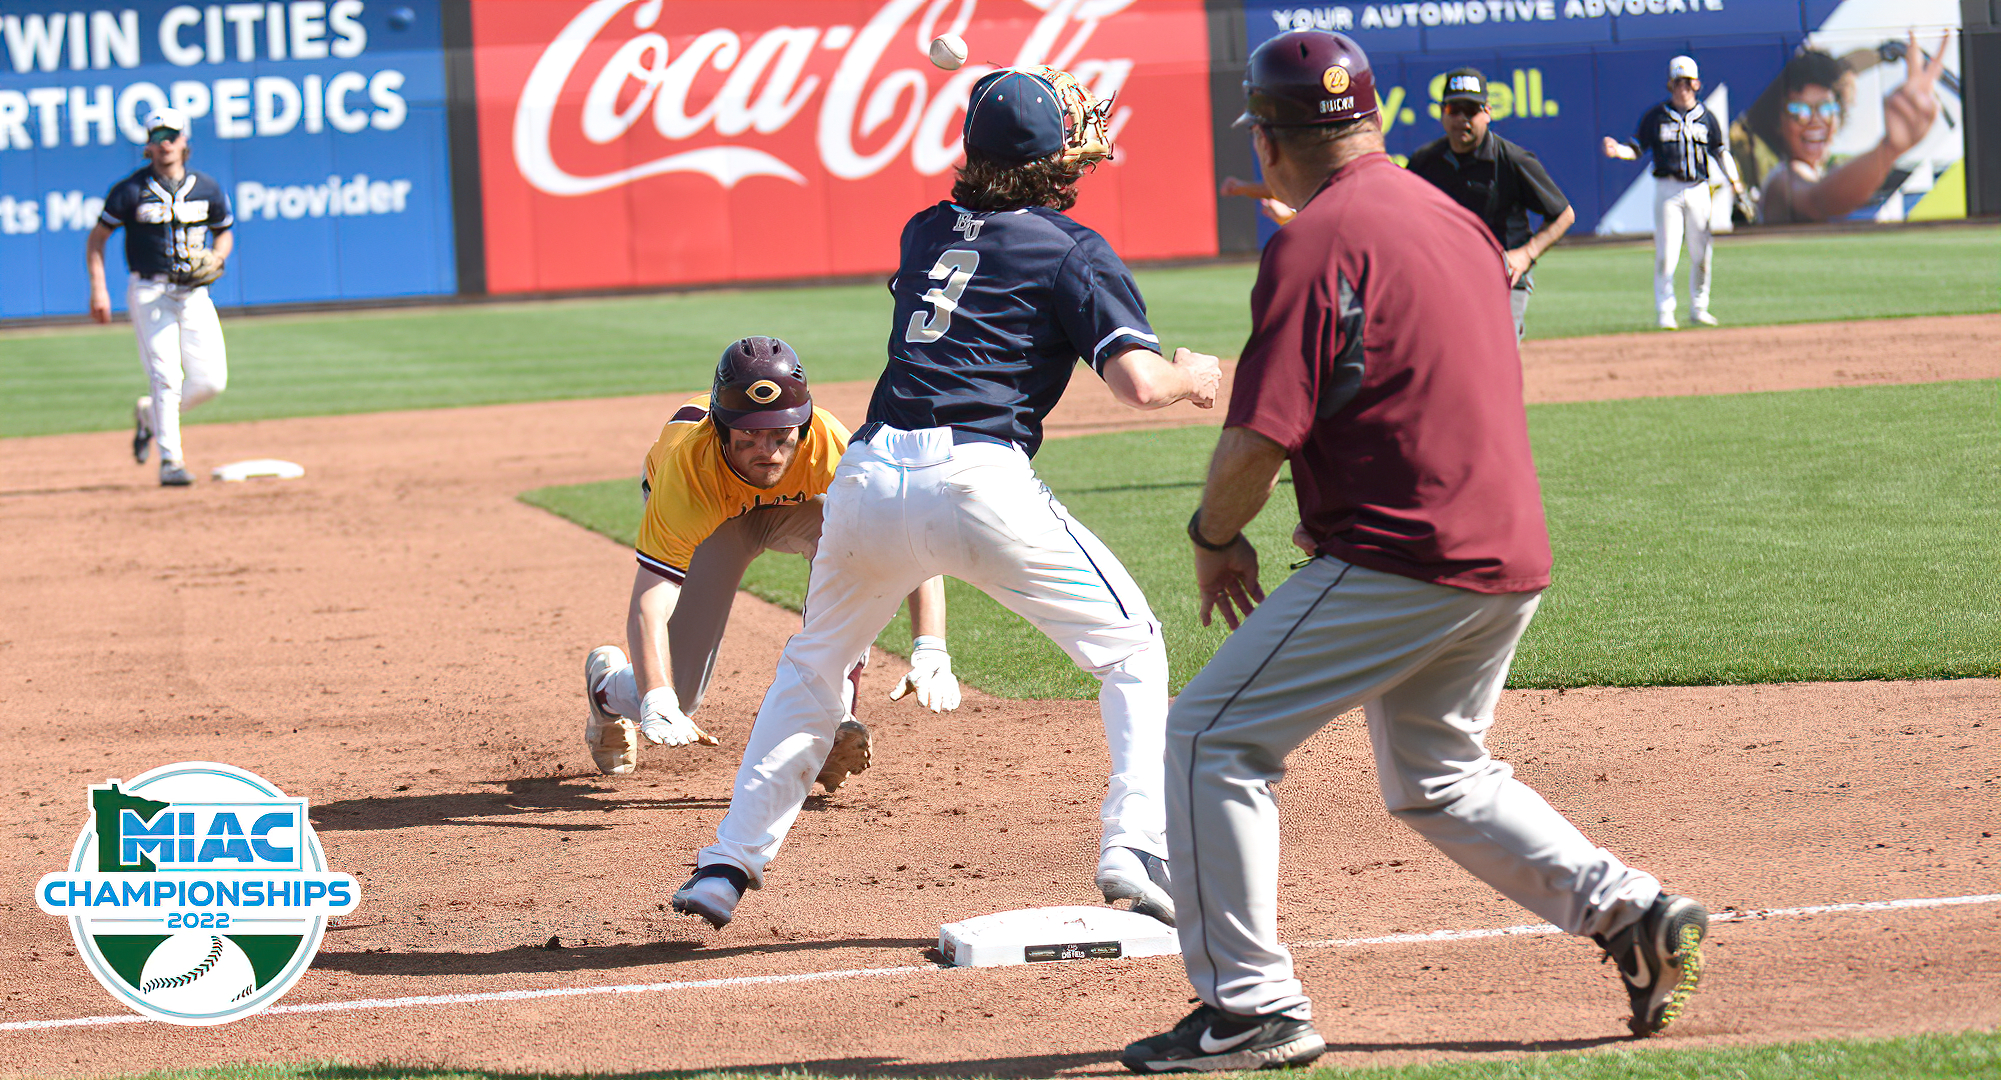 Wyatt Gunkel slides into third base inning during the fifth inning of the Cobbers' MIAC playoff game against Bethel.